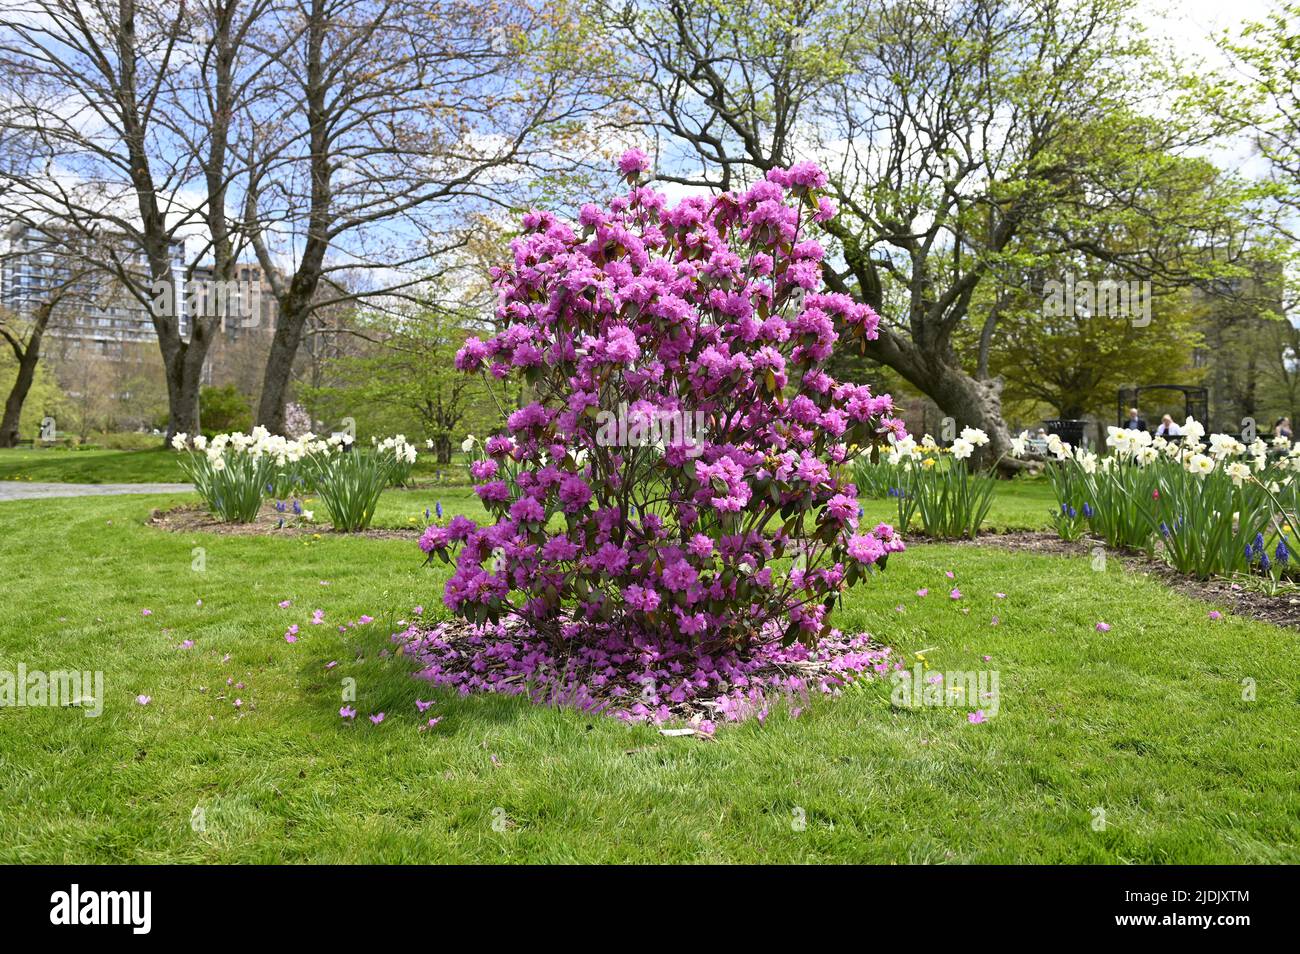 Rhododendron pink-purple flowers blossom in the blooming Halifax Public Garden. Big pink blooming azalea. Best place for relaxation and walking. Stock Photo